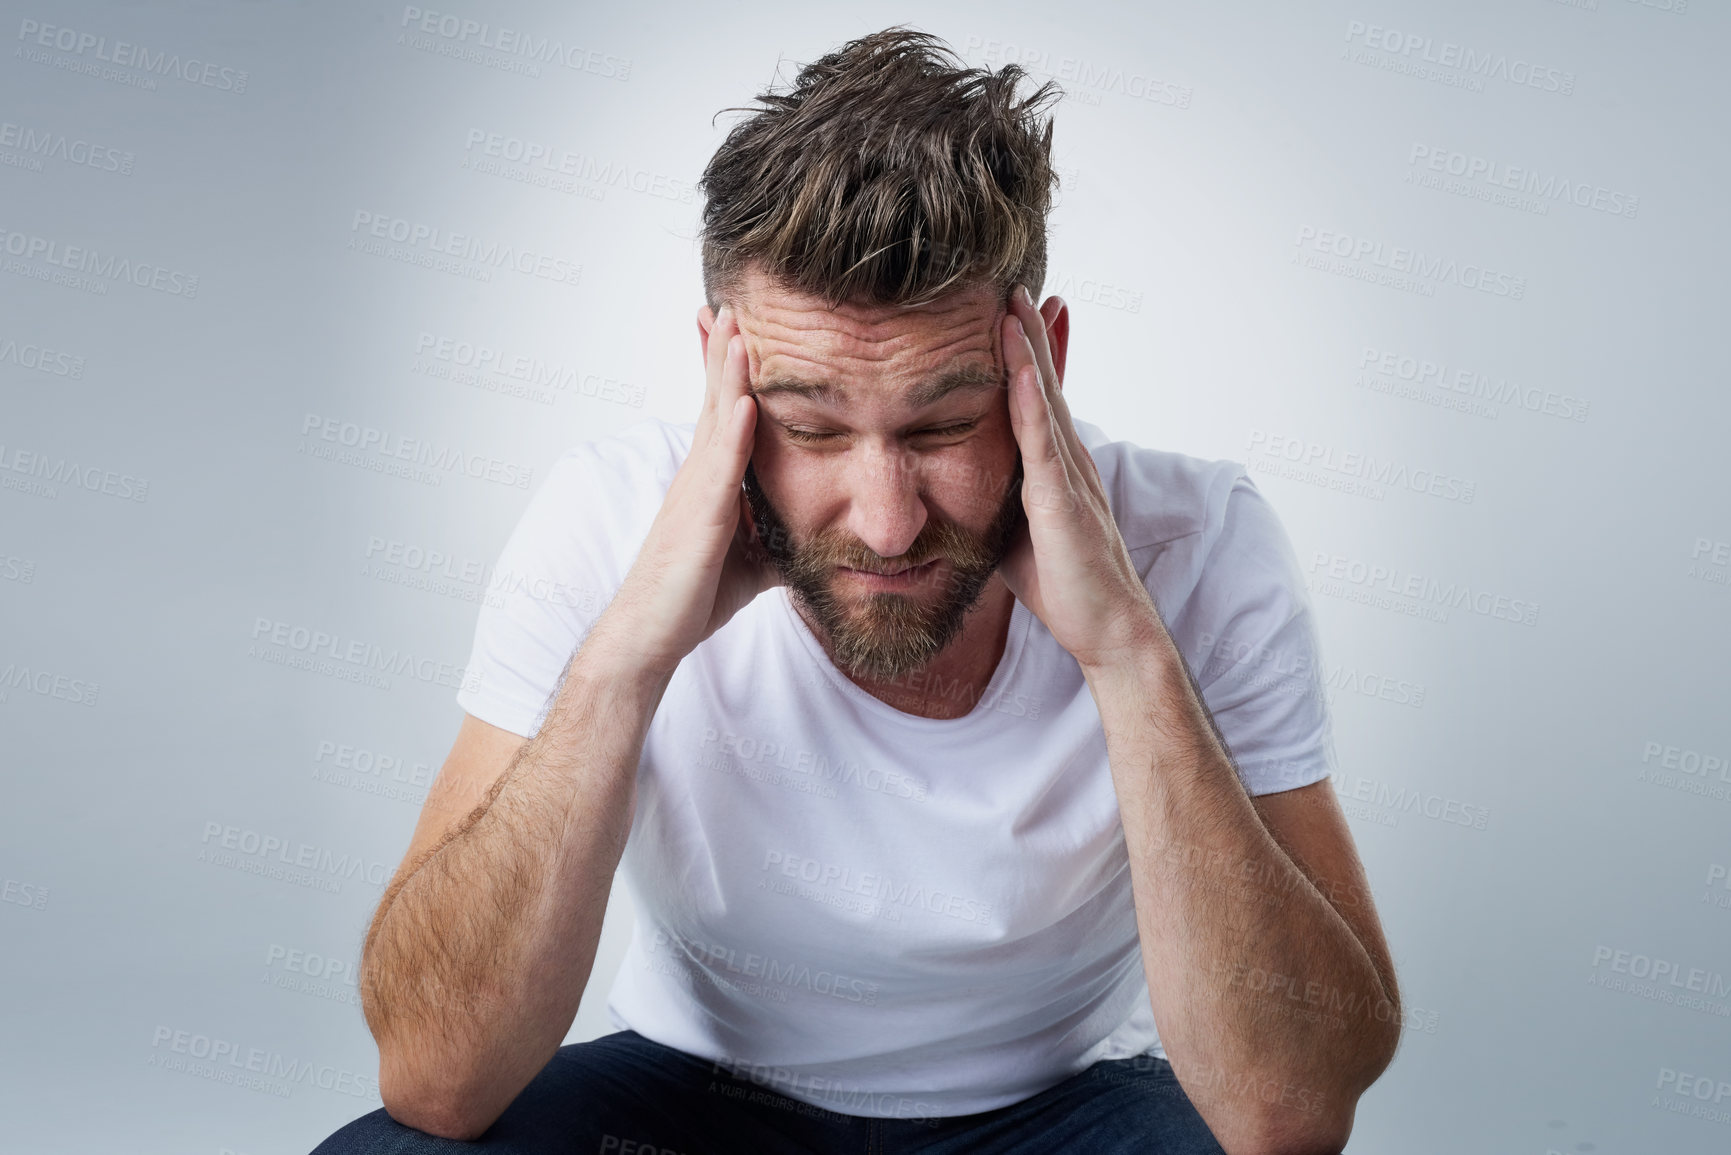 Buy stock photo Shot of a young man with a headache holding his head while sitting on a chair in the studio